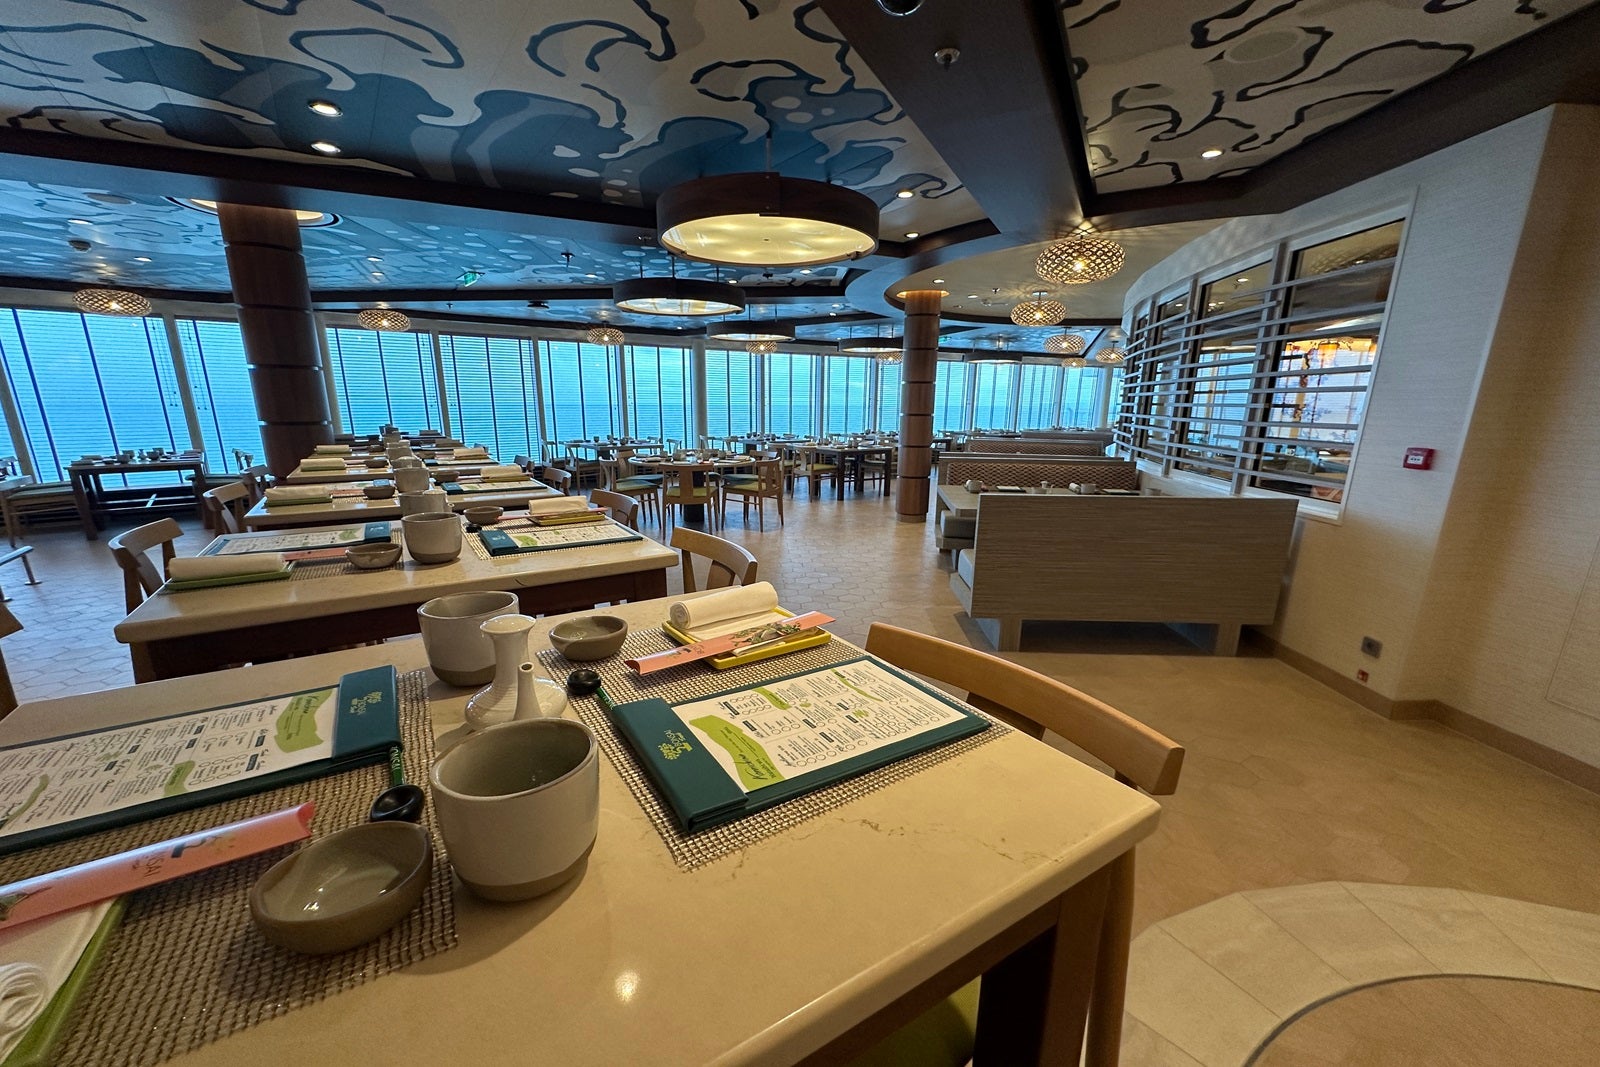 A sushi restaurant with high-top tables set with menus, chopsticks and teacups